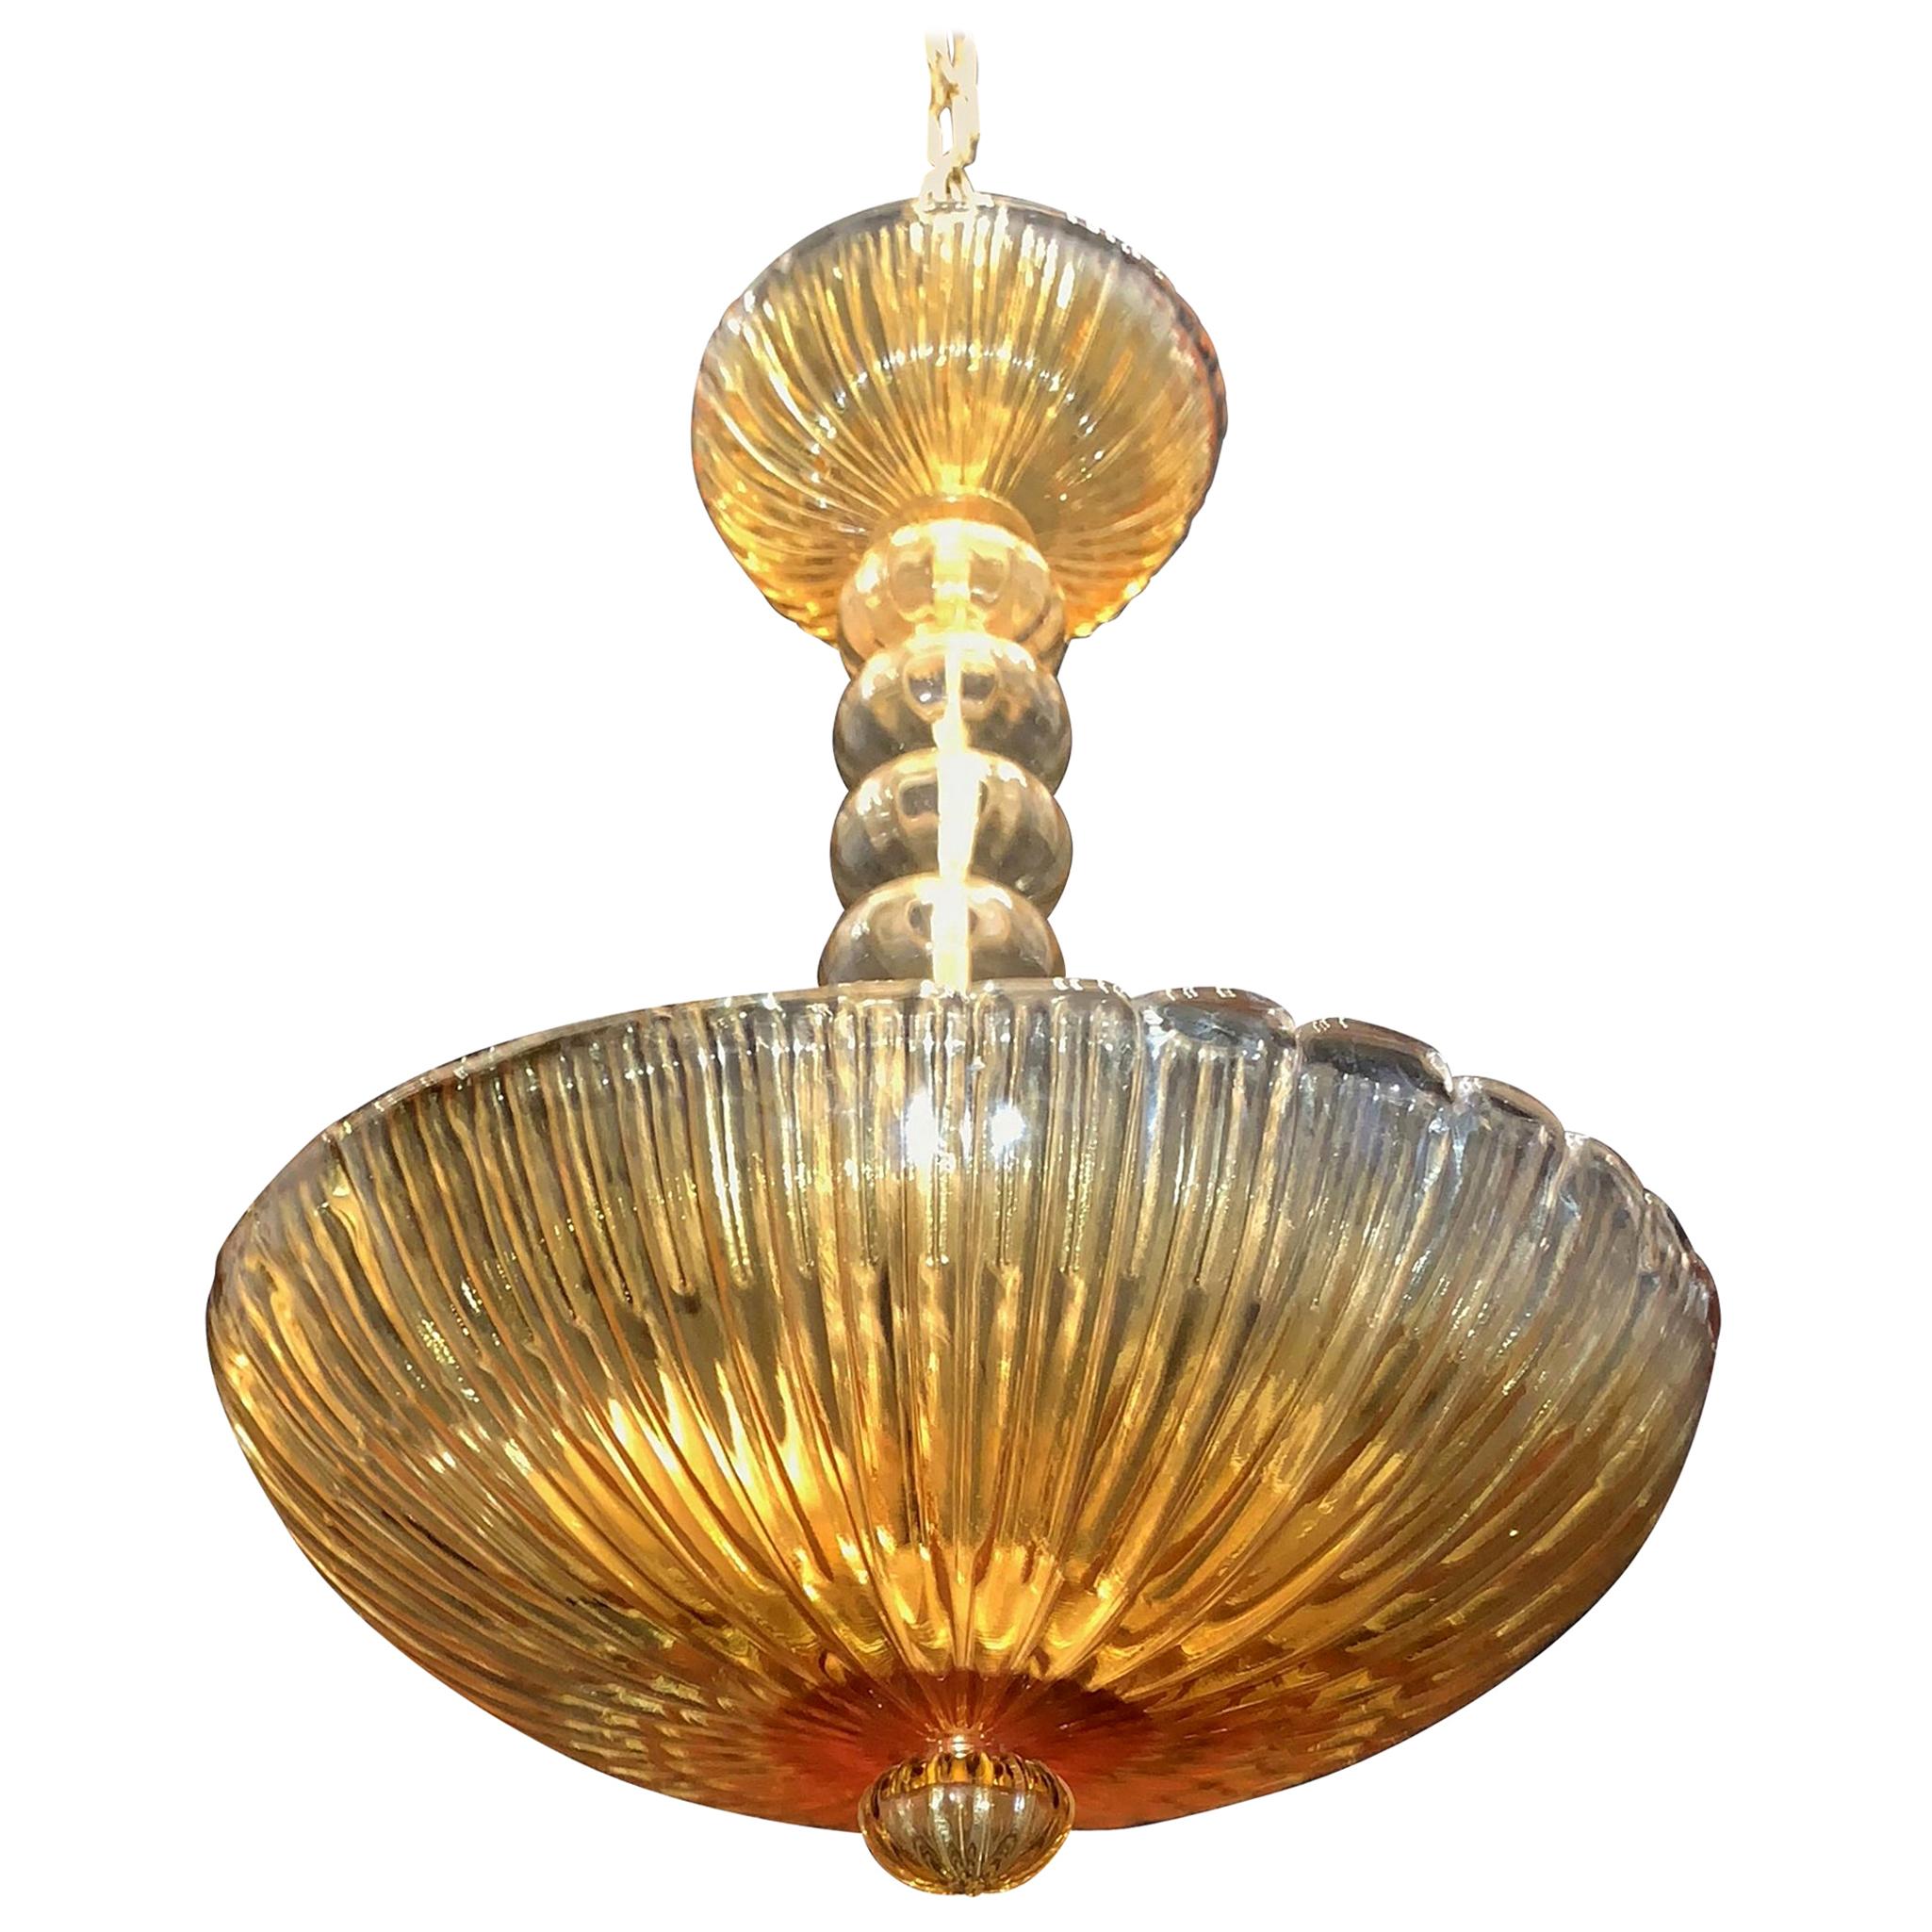 Midcentury Barovier Seguso Murano Italian Ribbed Amber Glass Dome Chandelier For Sale